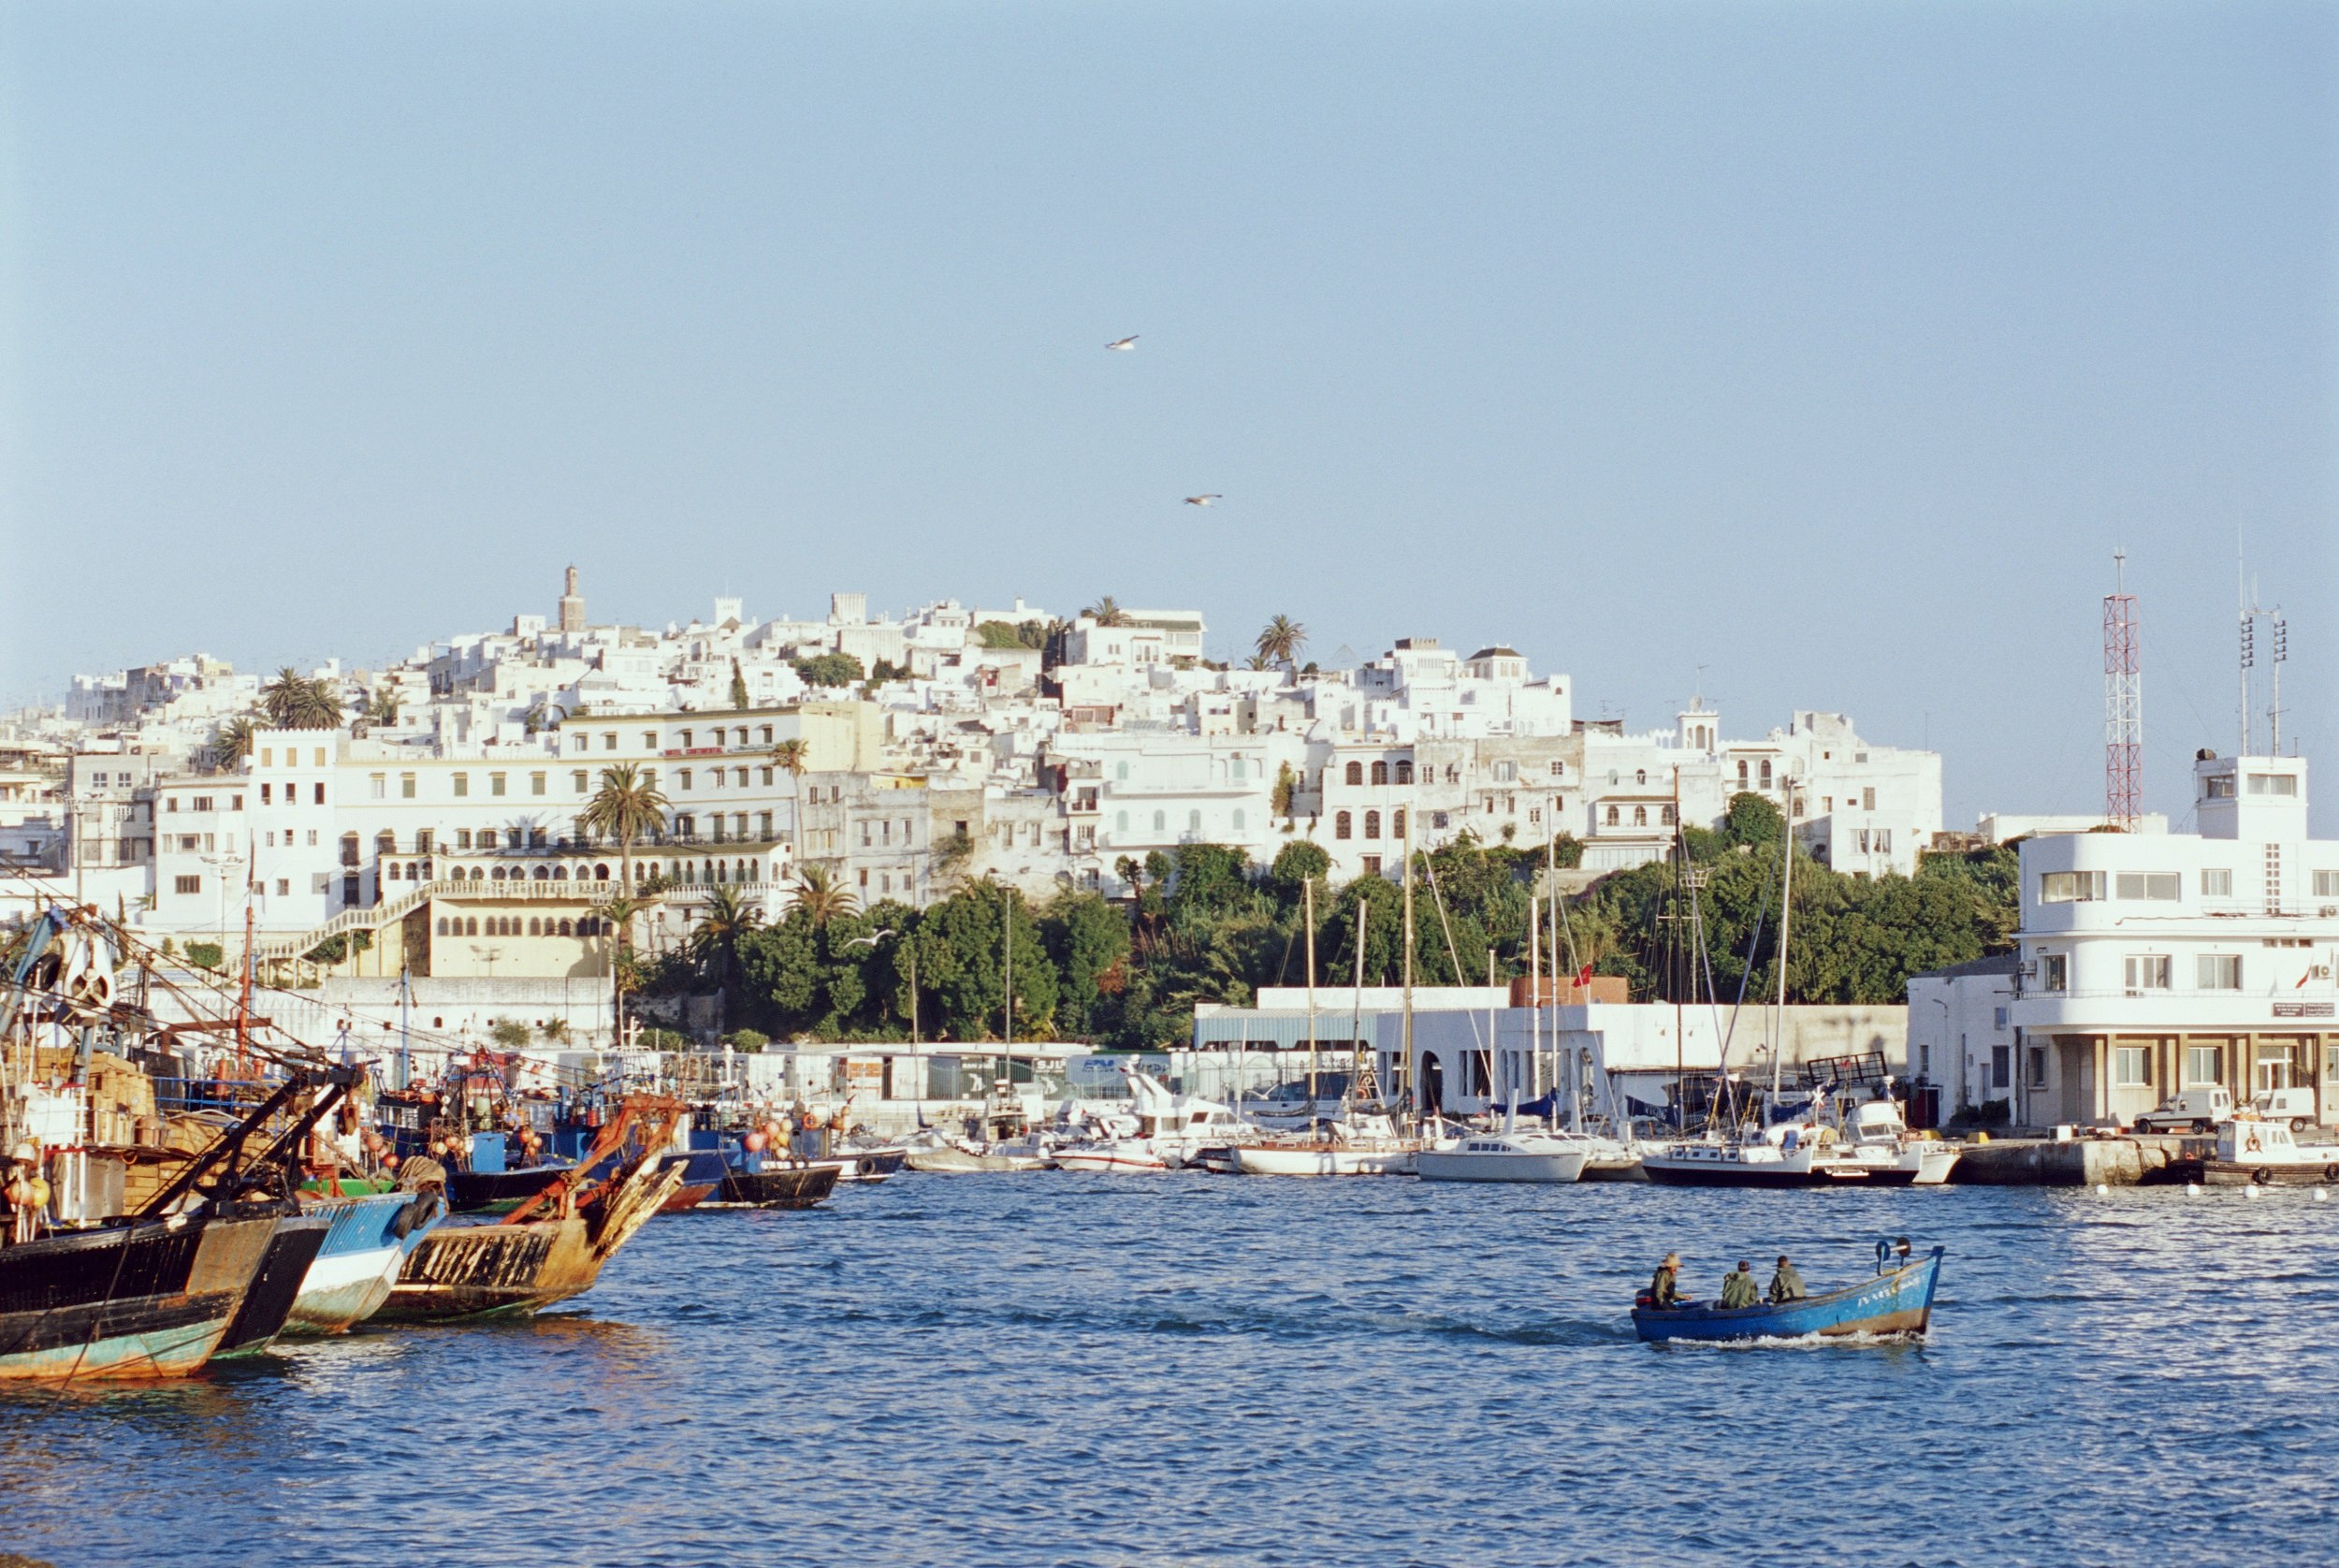 Looking over the waters of the Mediterranean, the white facades of Tangier's old city rises from the shoreline; boats are moored to shore, while a small one makes its way across the harbour.